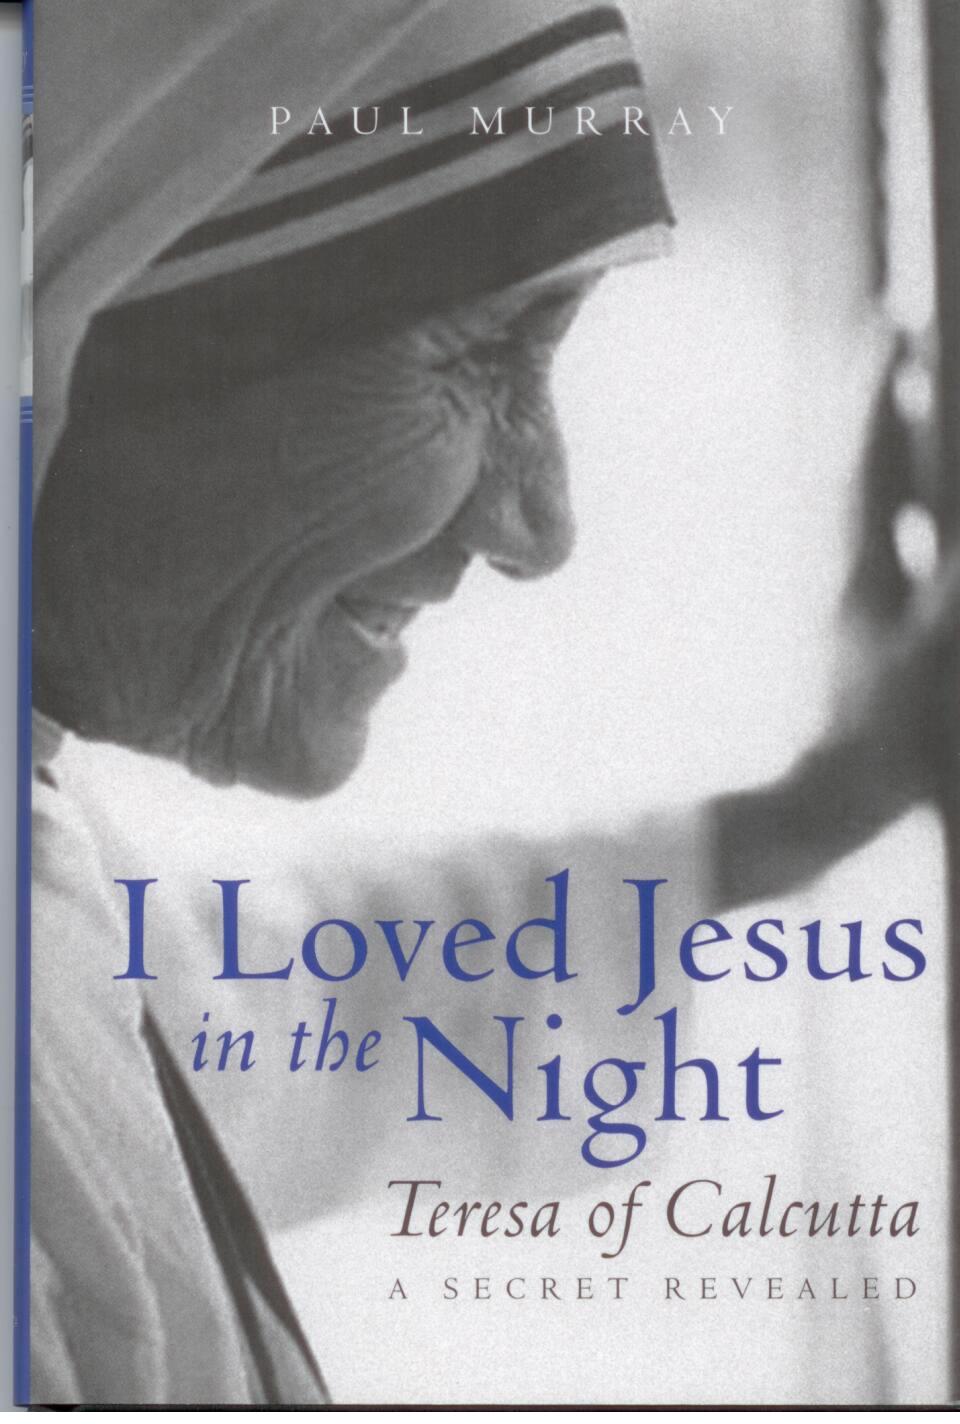 I Loved Jesus in the Night by Paul Murray